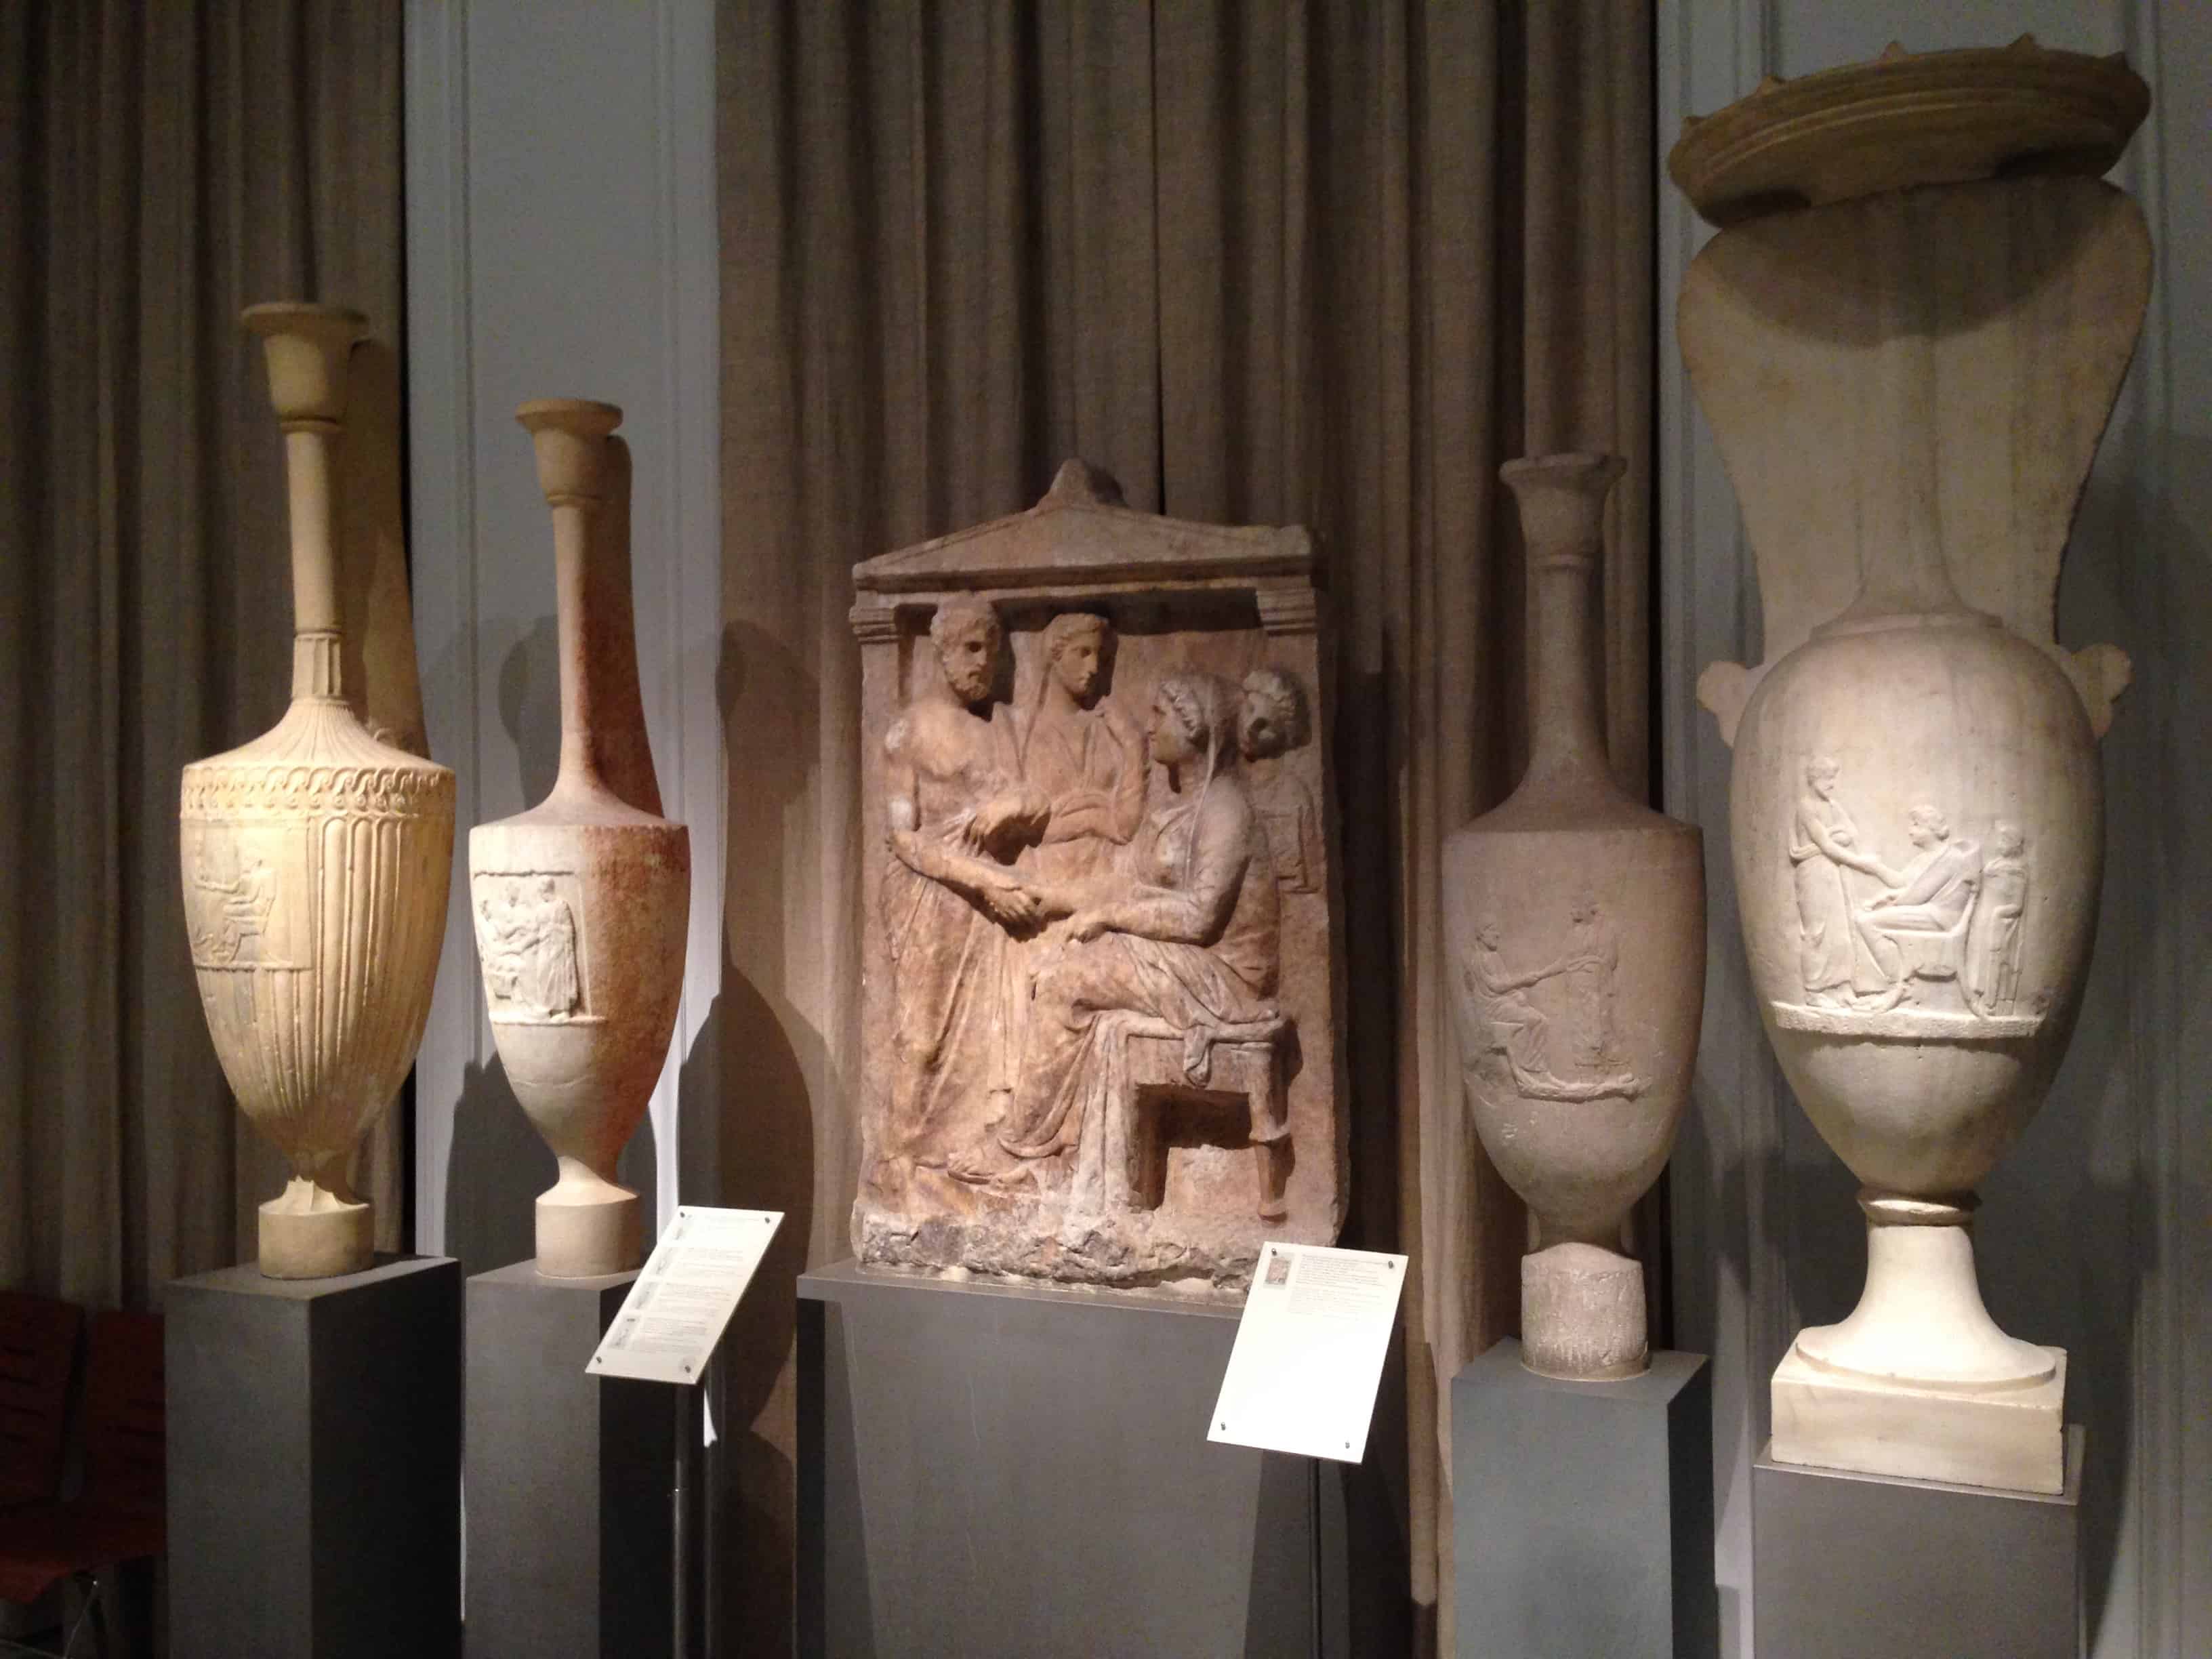 Antiquities Gallery at the Benaki Museum of Greek Culture in Athens, Greece